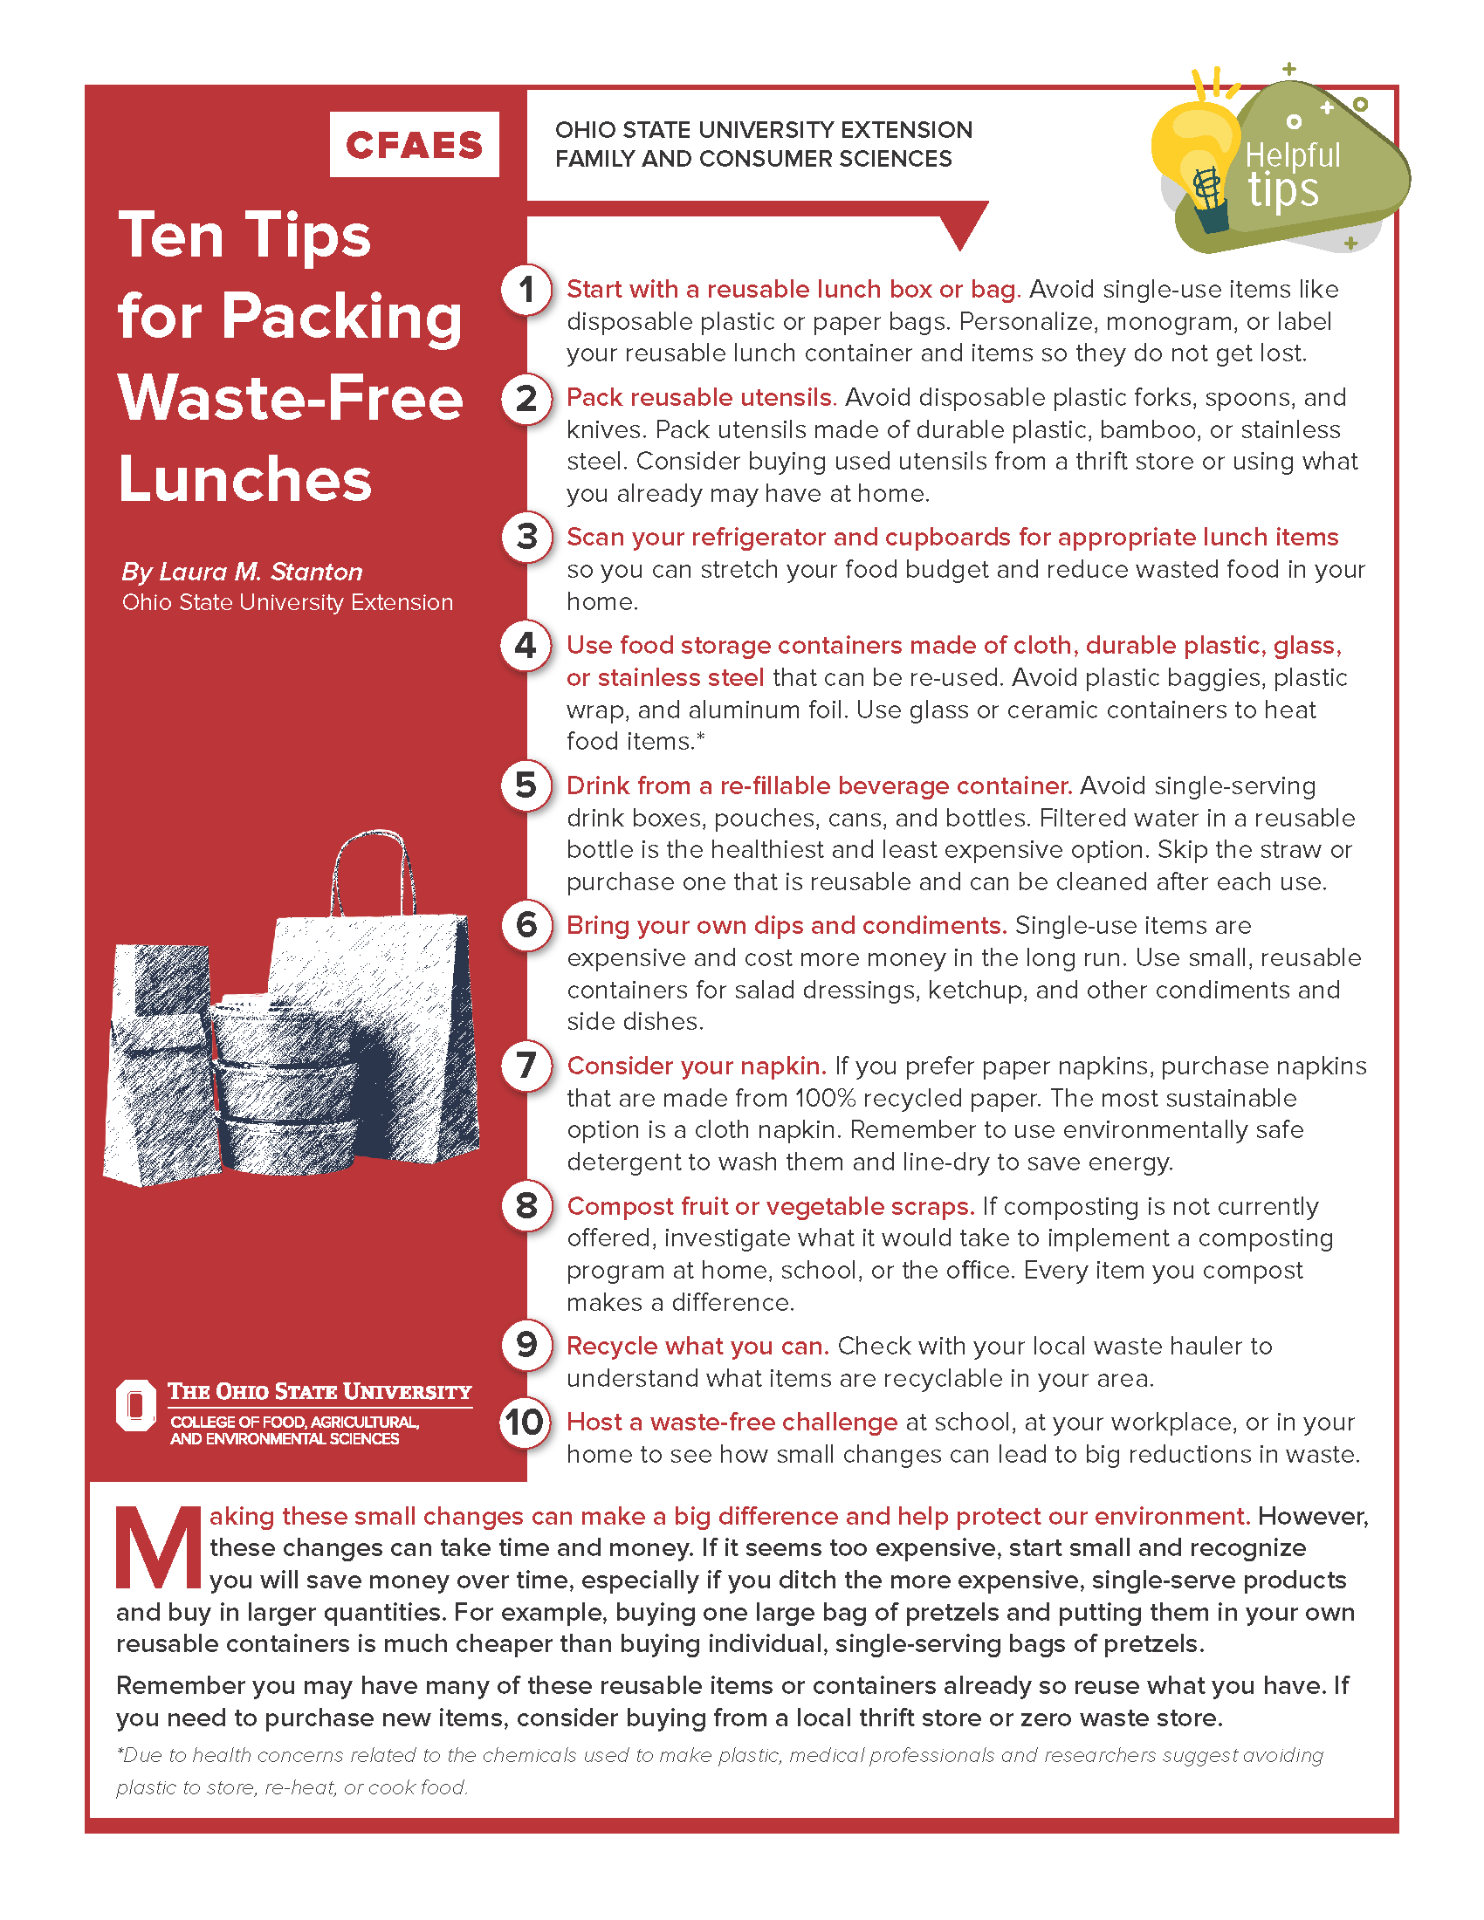 https://u.osu.edu/extensionclermont/files/2021/08/Ten-Tips-for-Packing-Waste-Free-Lunches.png